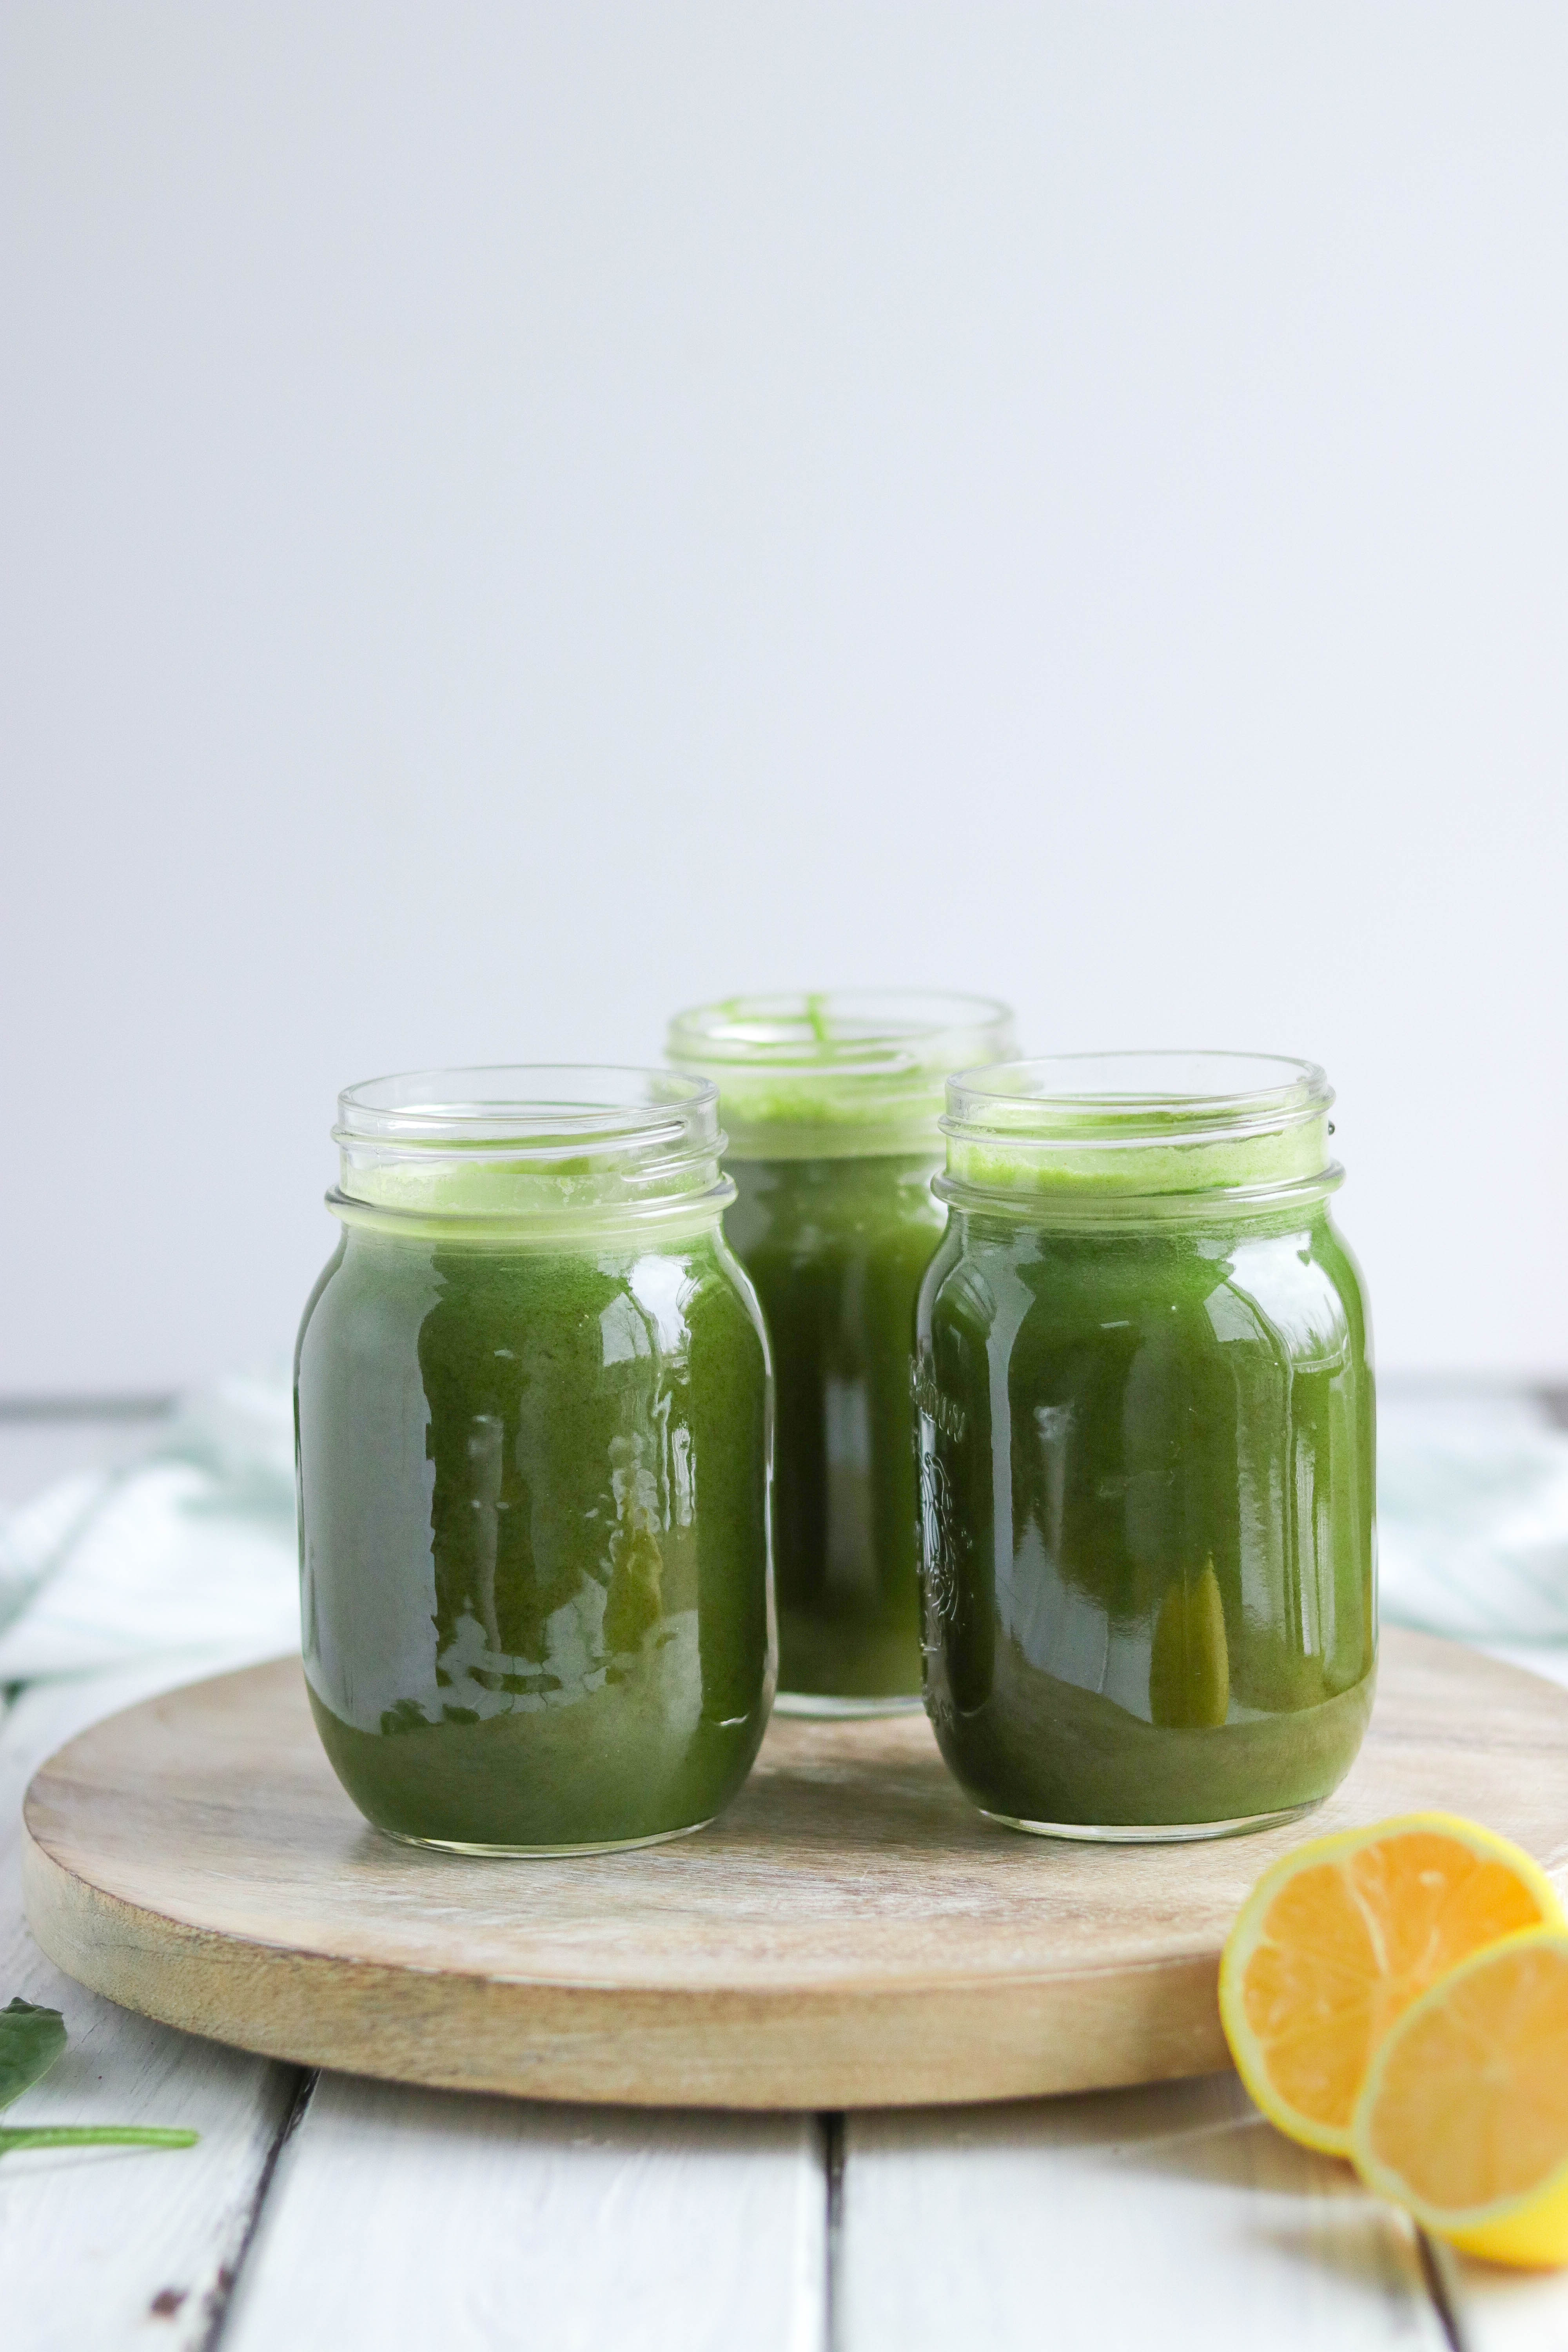 This detox green juice recipe helps you lose weight, get healthy and detox your body. Its delicious and easy to make! #greenjuice #detoxjuice #greenjuicerecipe #juicecleanse #greenjuicecleanse | Nikki's Plate